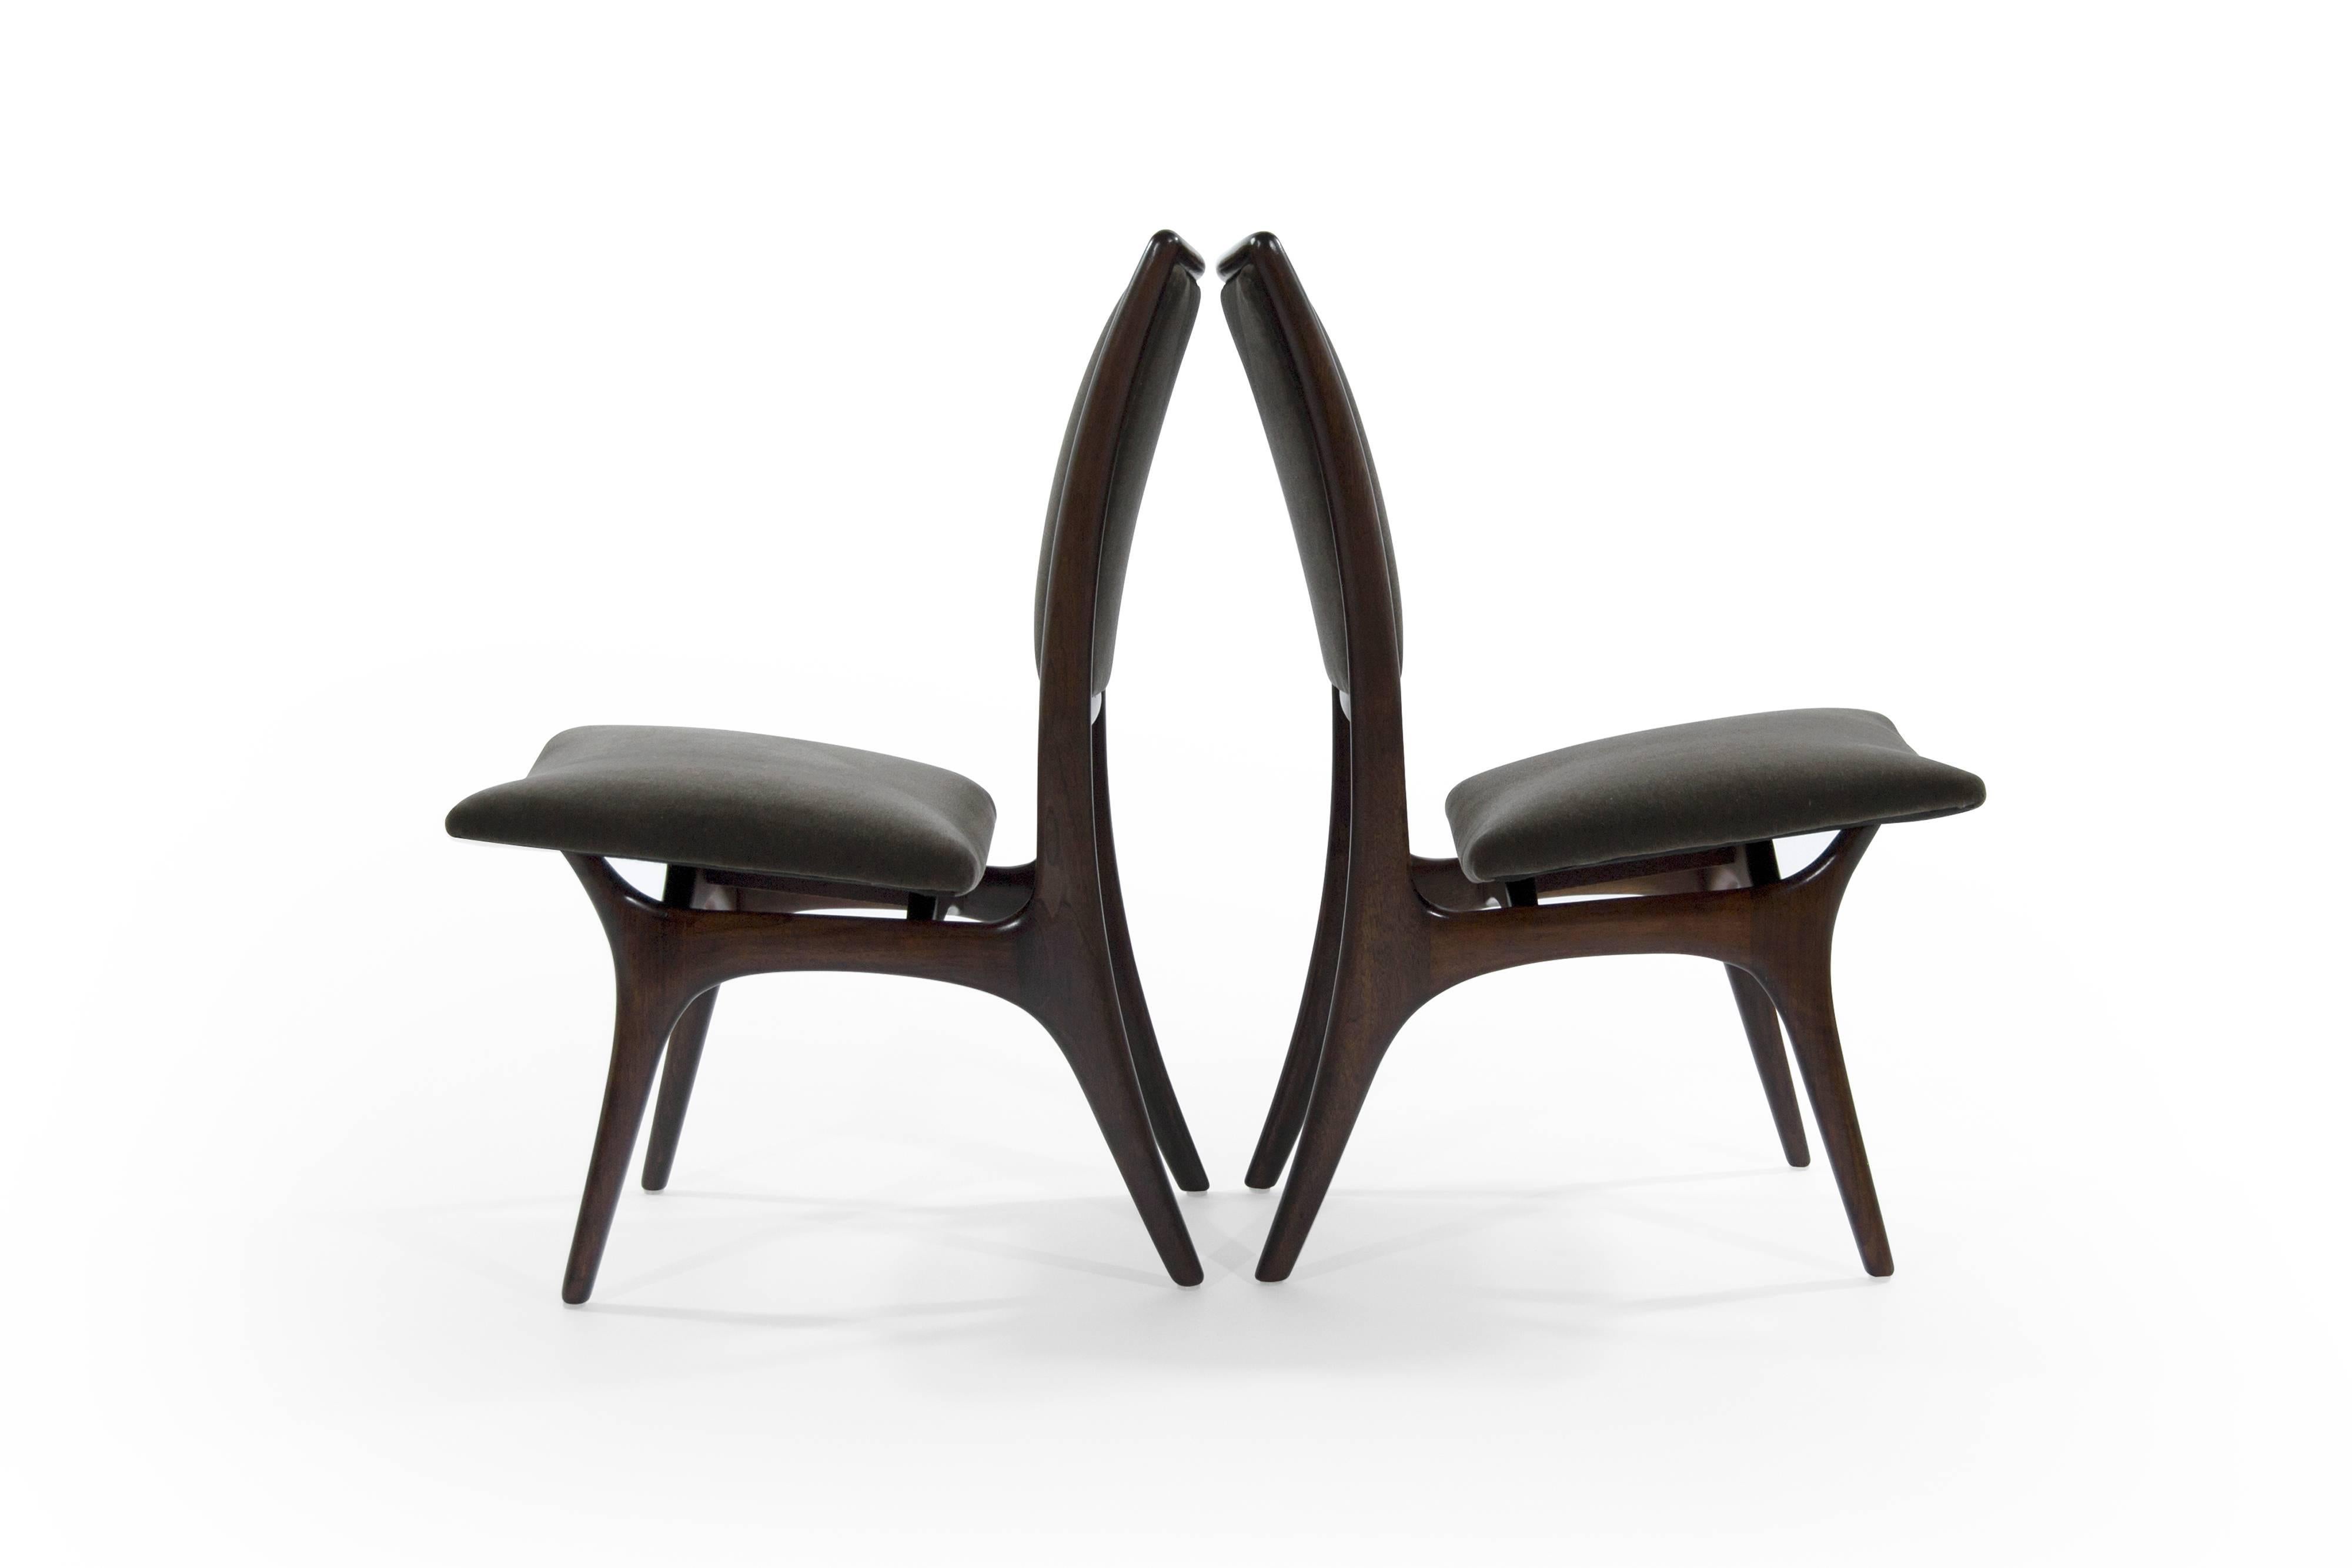 Pair of sculptural walnut side or desk chairs designed by Vladimir Kagan for Kagan Dreyfuss newly upholstered in charcoal mohair. Walnut frames fully restored.

Priced individually.